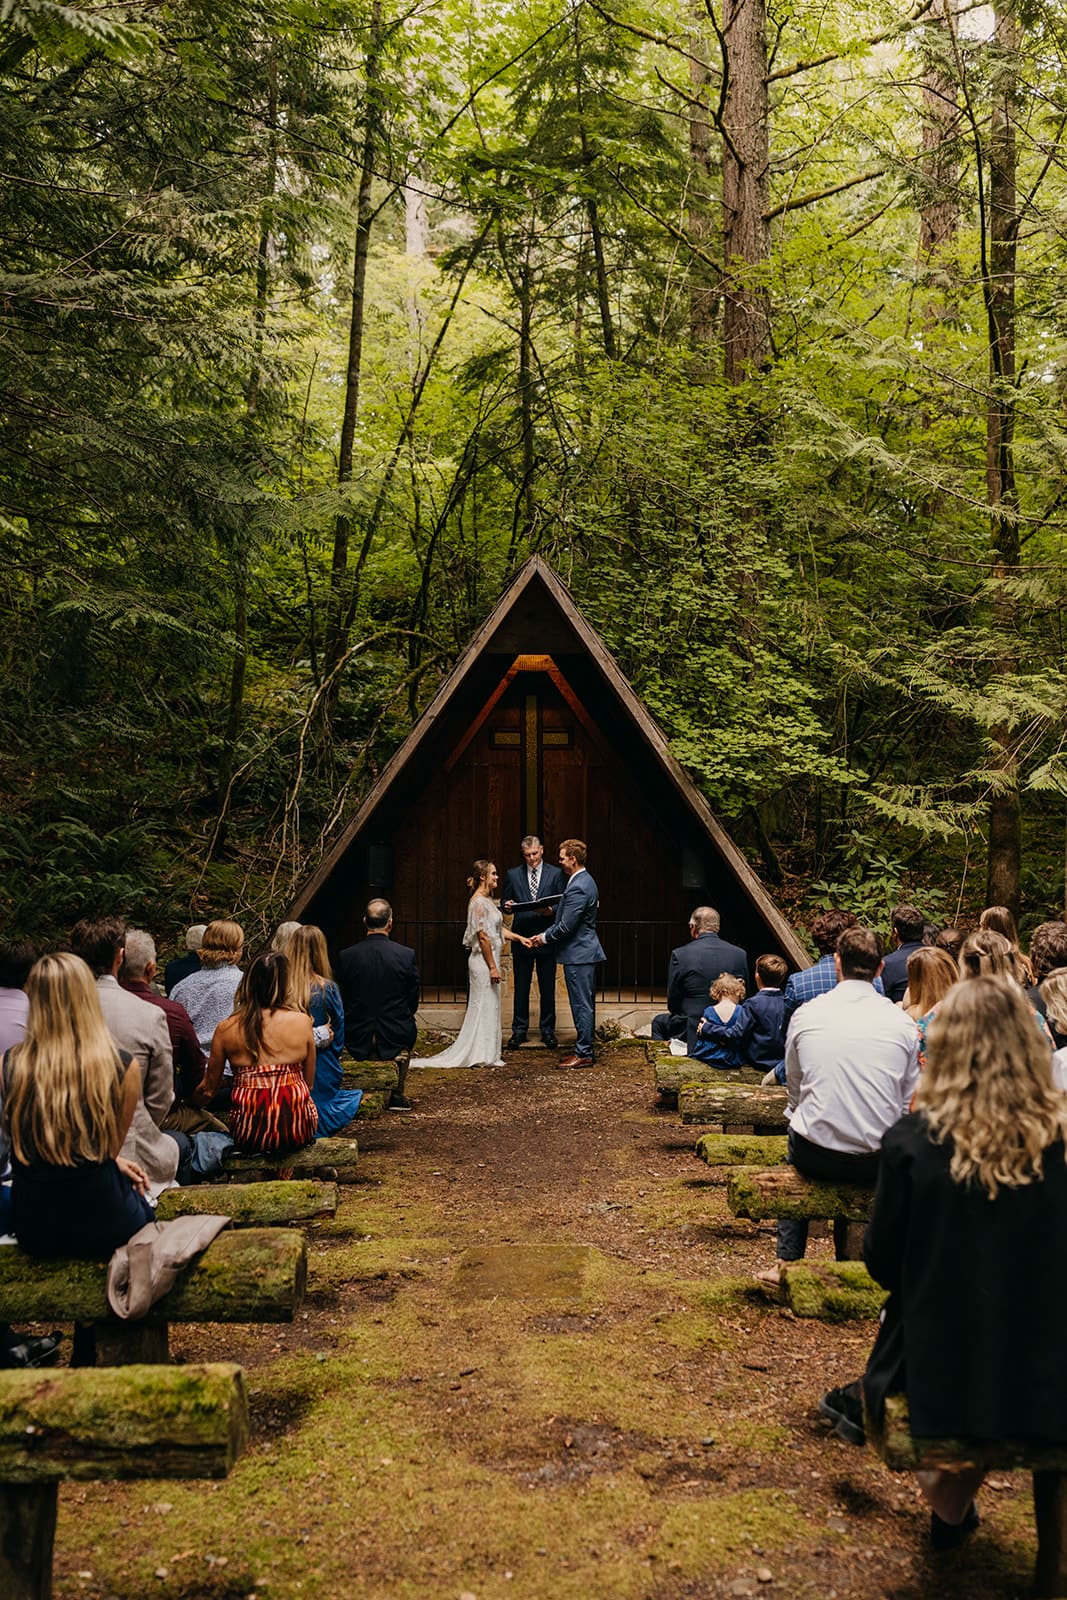 The couple during the ceremony in the mossy forest at the campground.